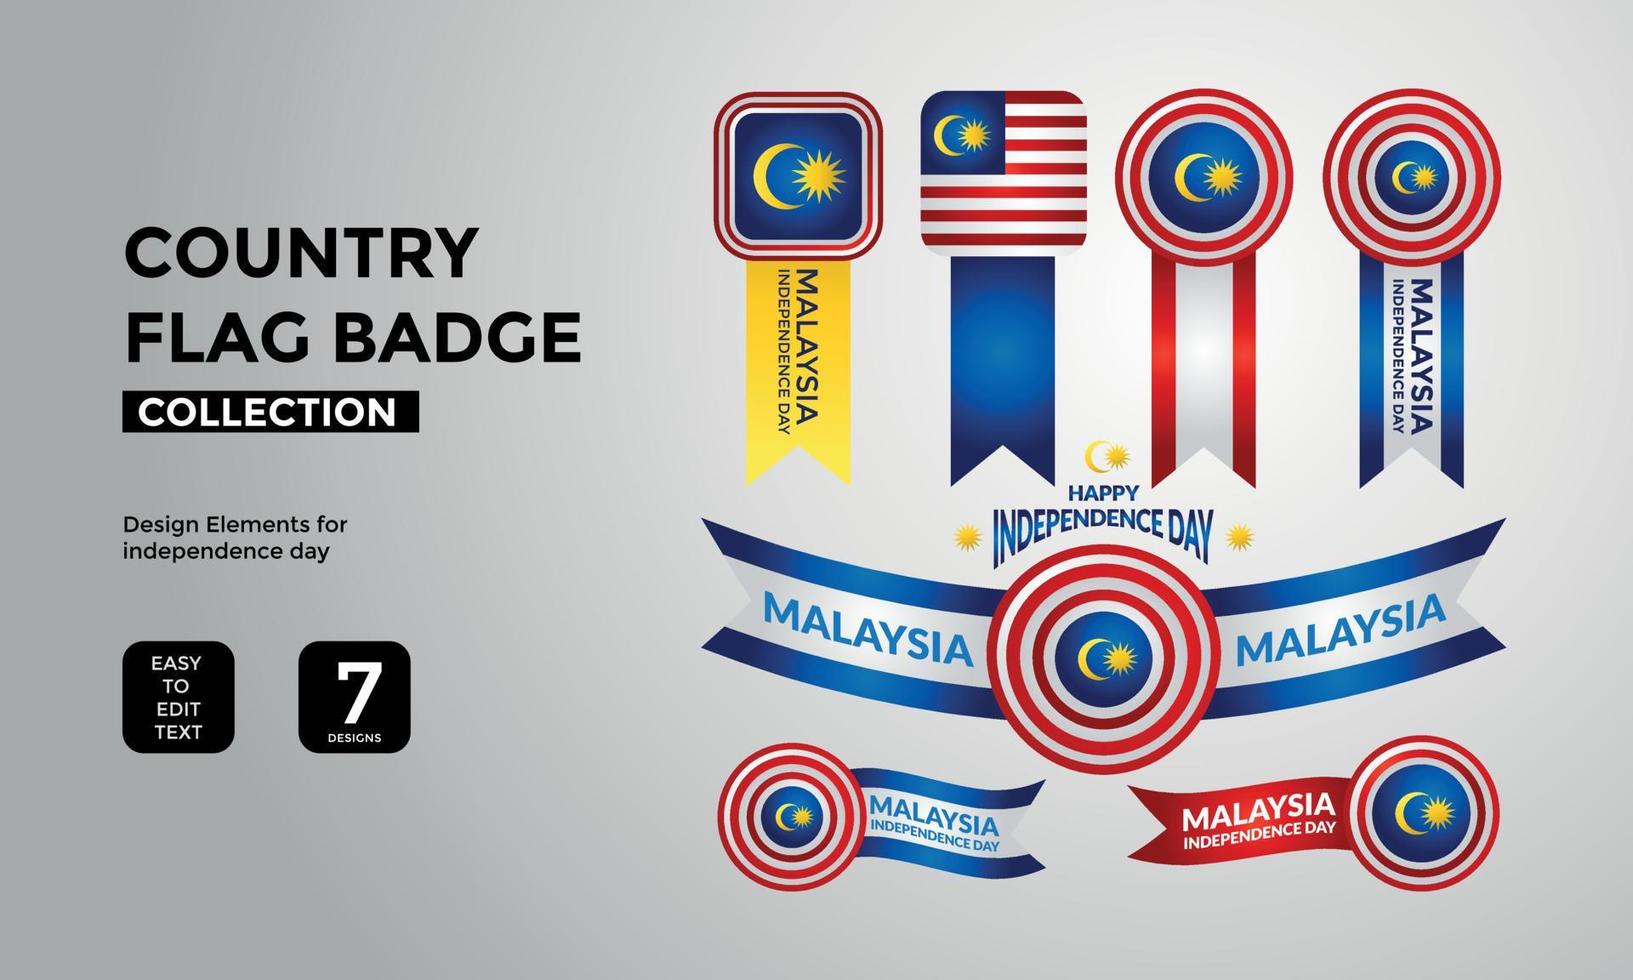 Malaysia flag badge collection, Happy Independence Day greetings vector